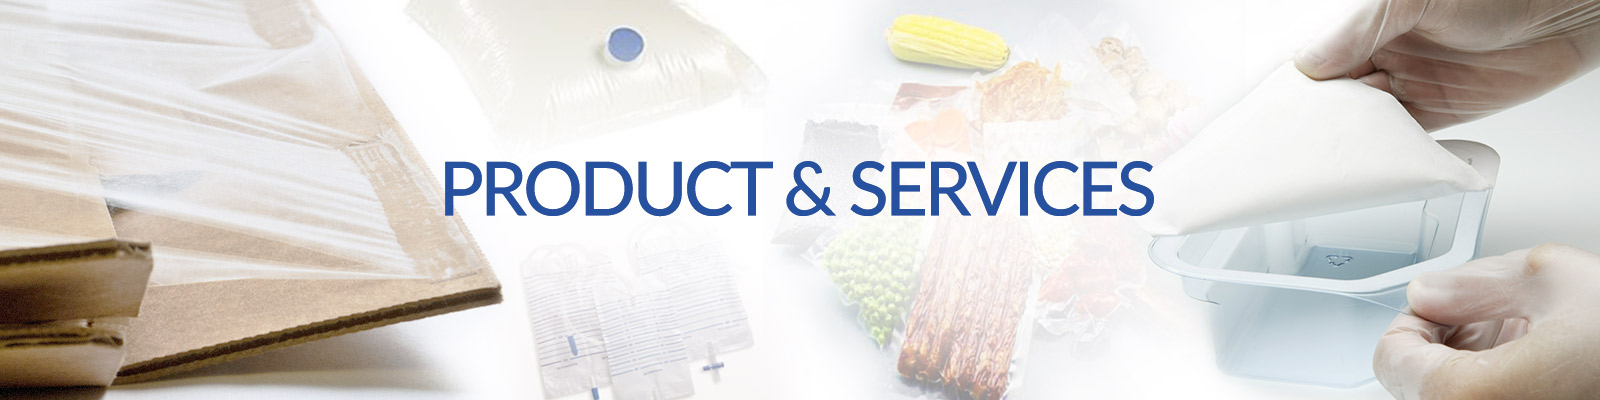 Products & Services - Top Banner